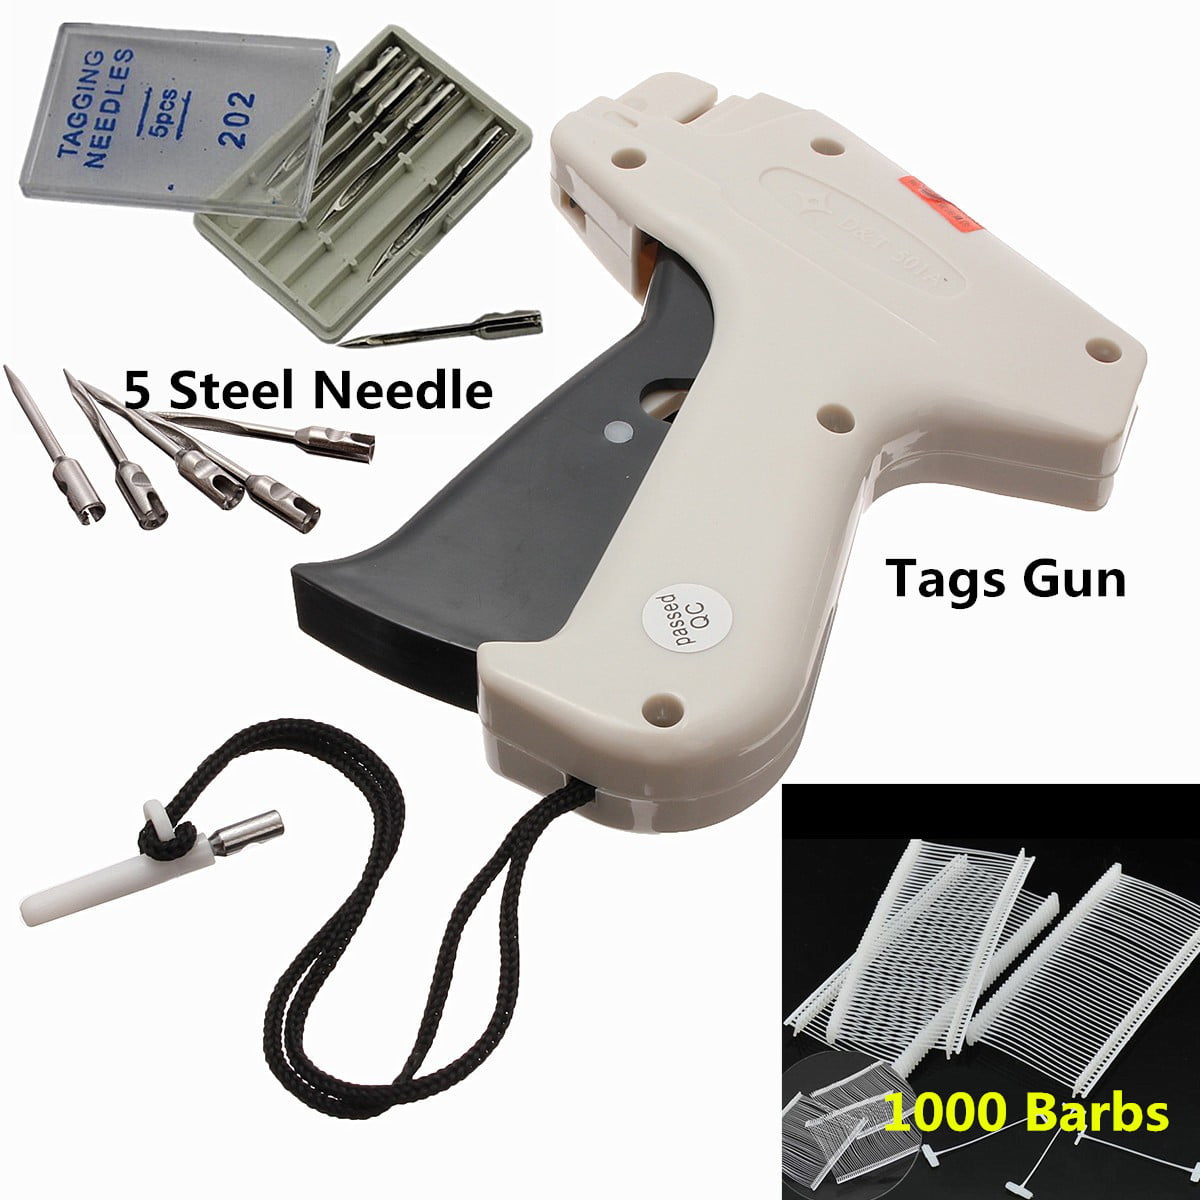 1 Needle Regular Clothing Price Lable Tagging Tagger Tag Gun with 1000 3" Barbs 